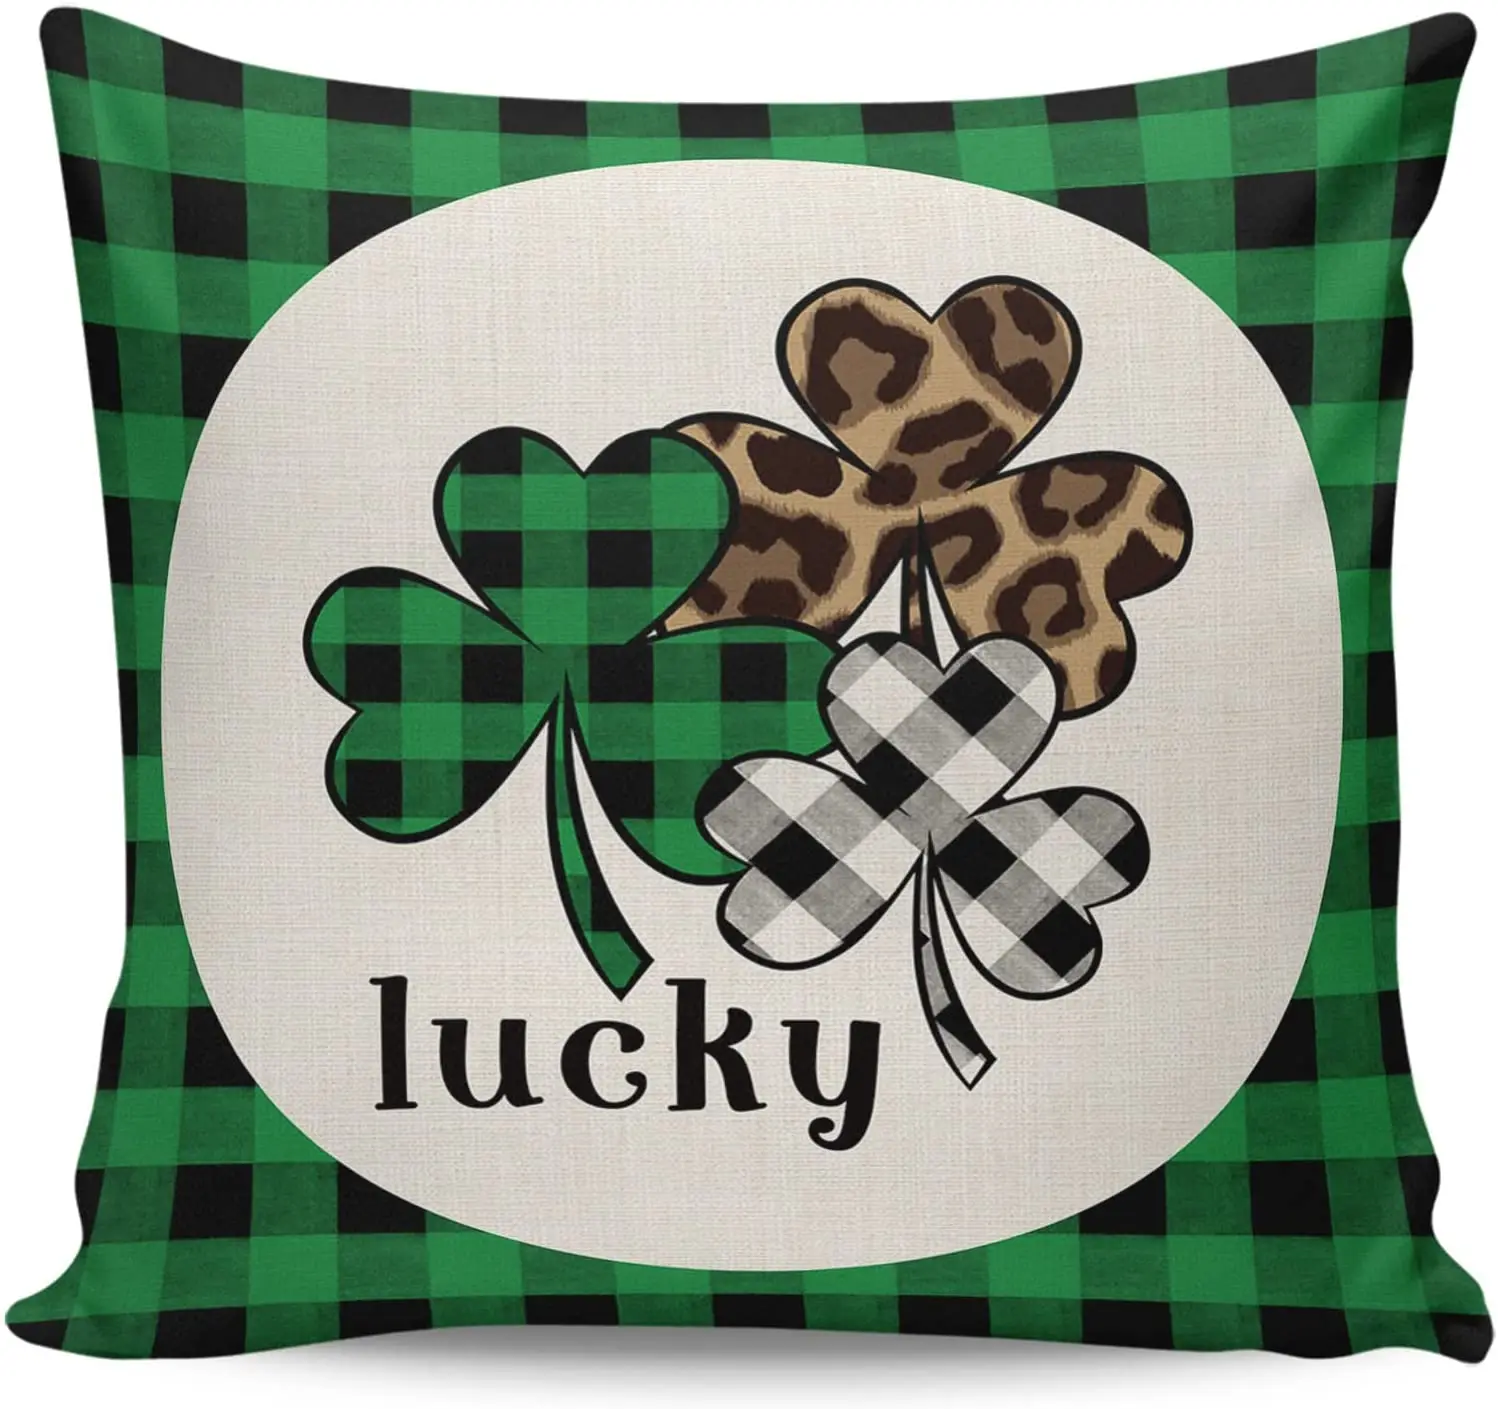 

Decorative Cozy Soft Throw Pillowcase Covers,St. Patrick's Day Lucky Clover on Buffalo Plaid Square Zipper Cushion Case